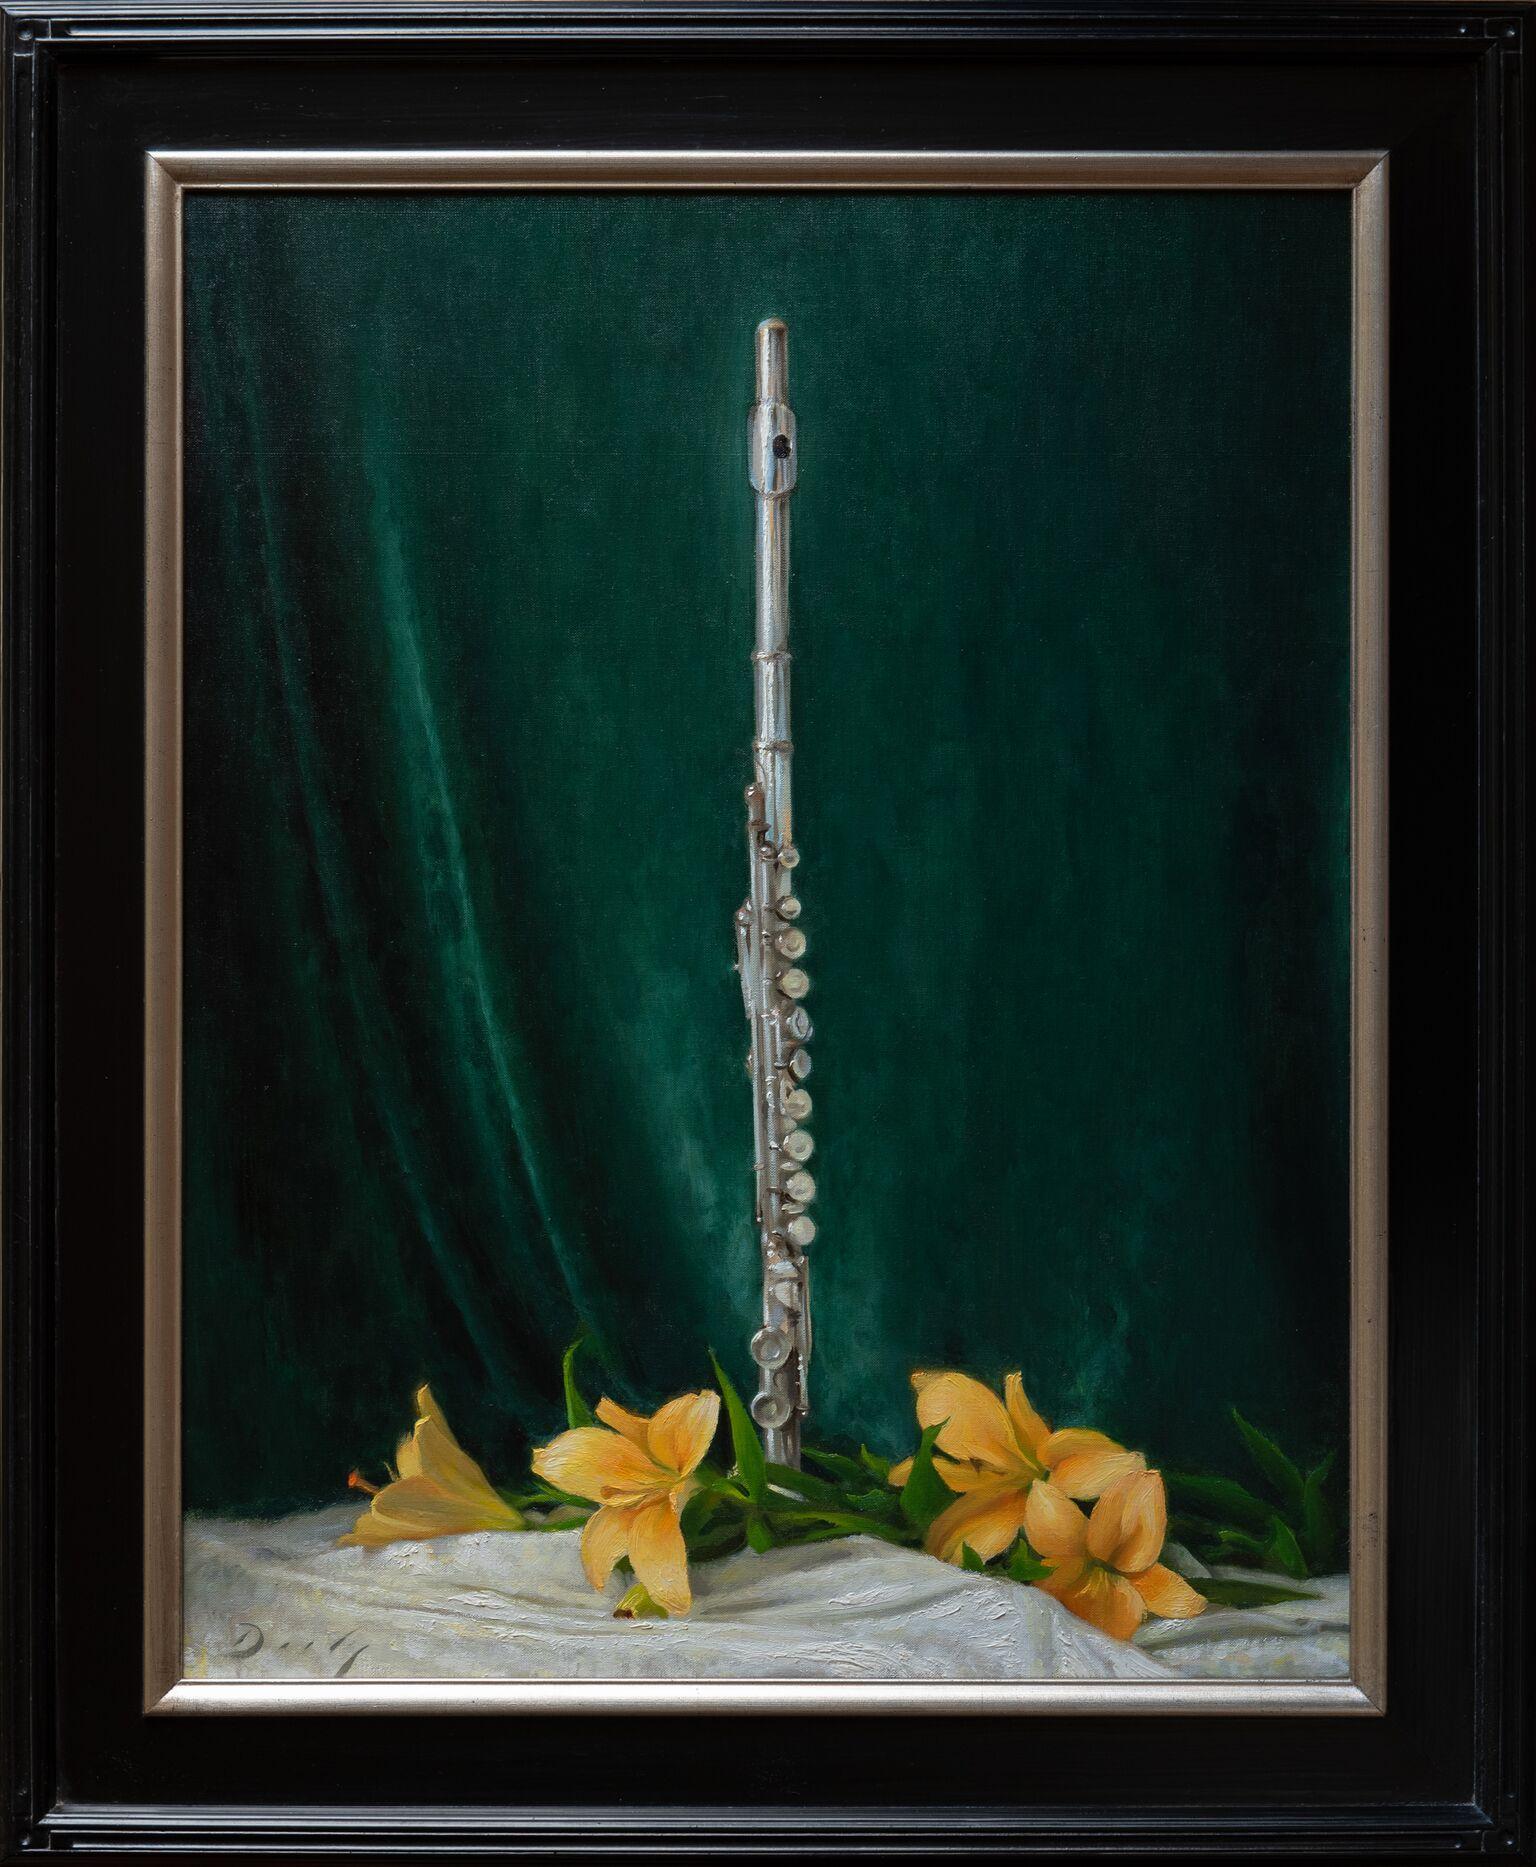 Realist flute with green background and yellow flowers, 